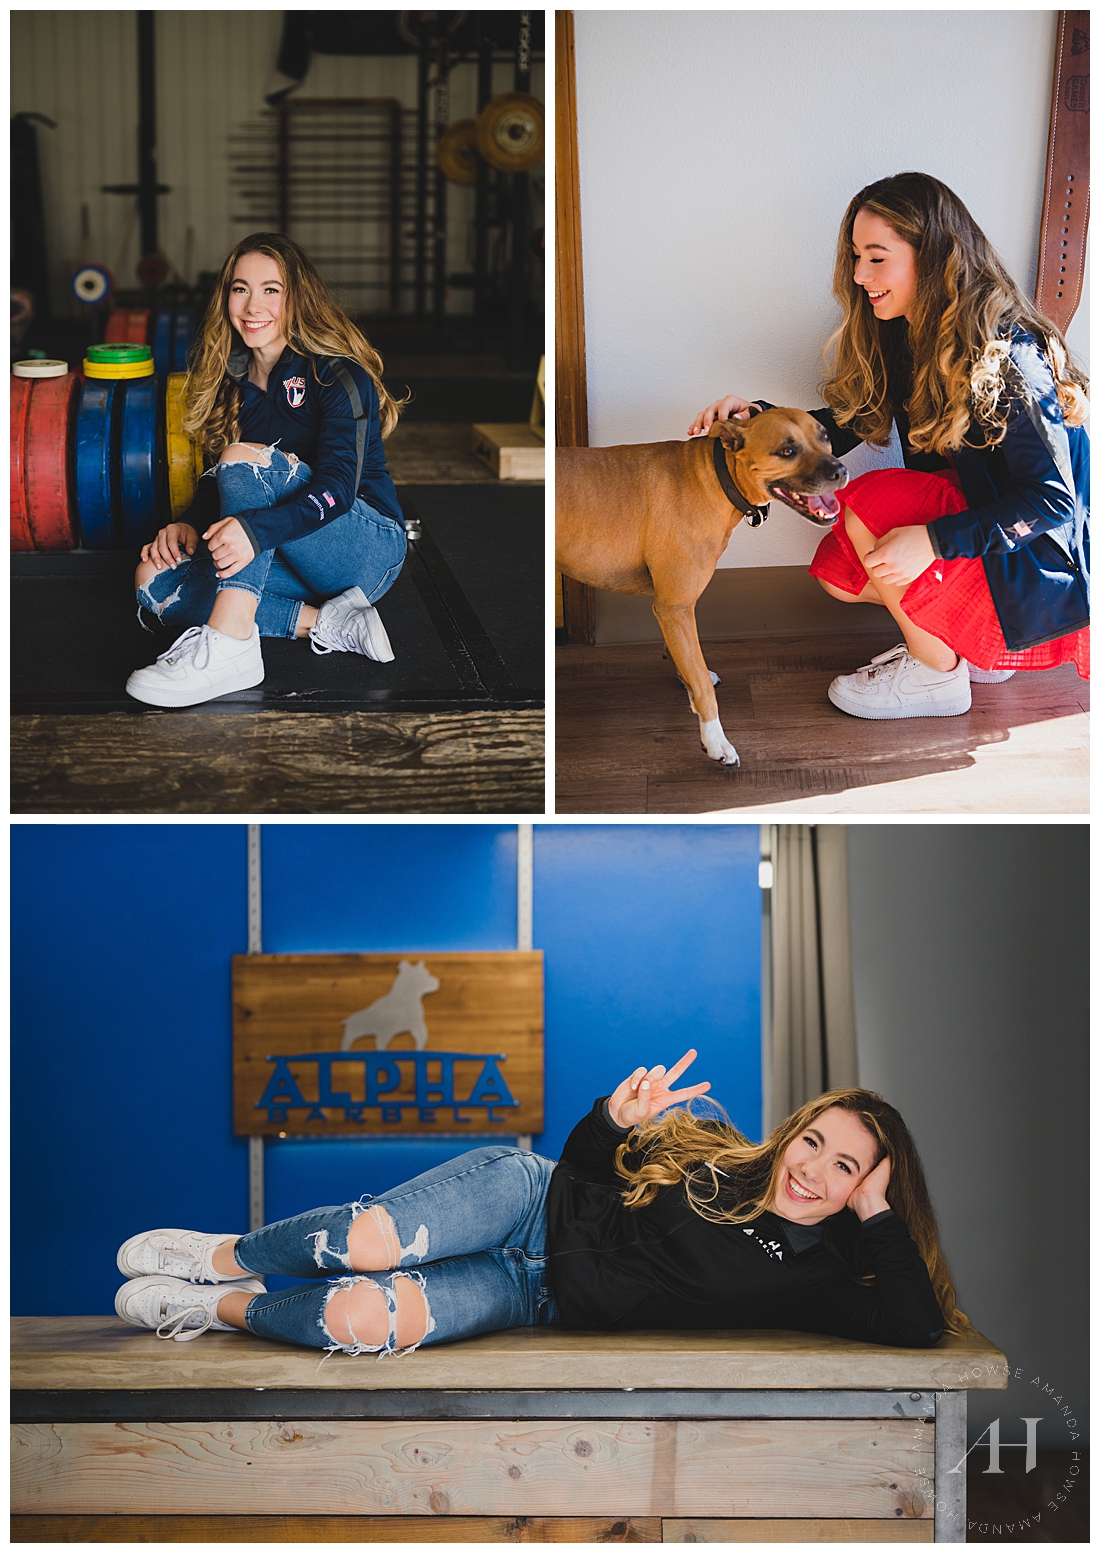 Showcasing Your Passions in Senior Photos | Cute Pup Pics, Weight Lifting Women | Photographed by the Best Tacoma Senior Photographer Amanda Howse Photography